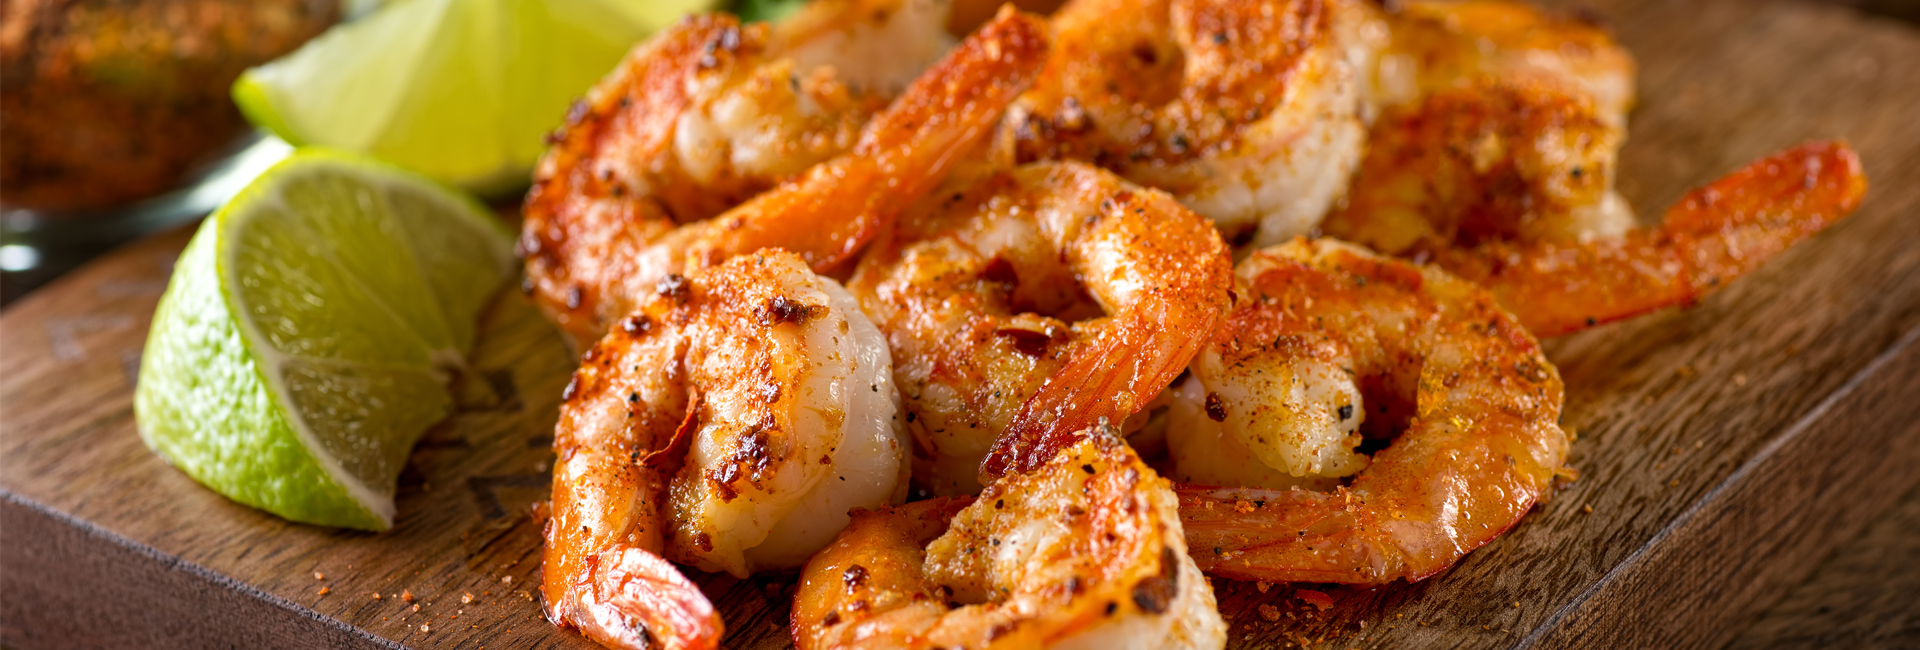 Delicious Grilled Shrimp with Lime